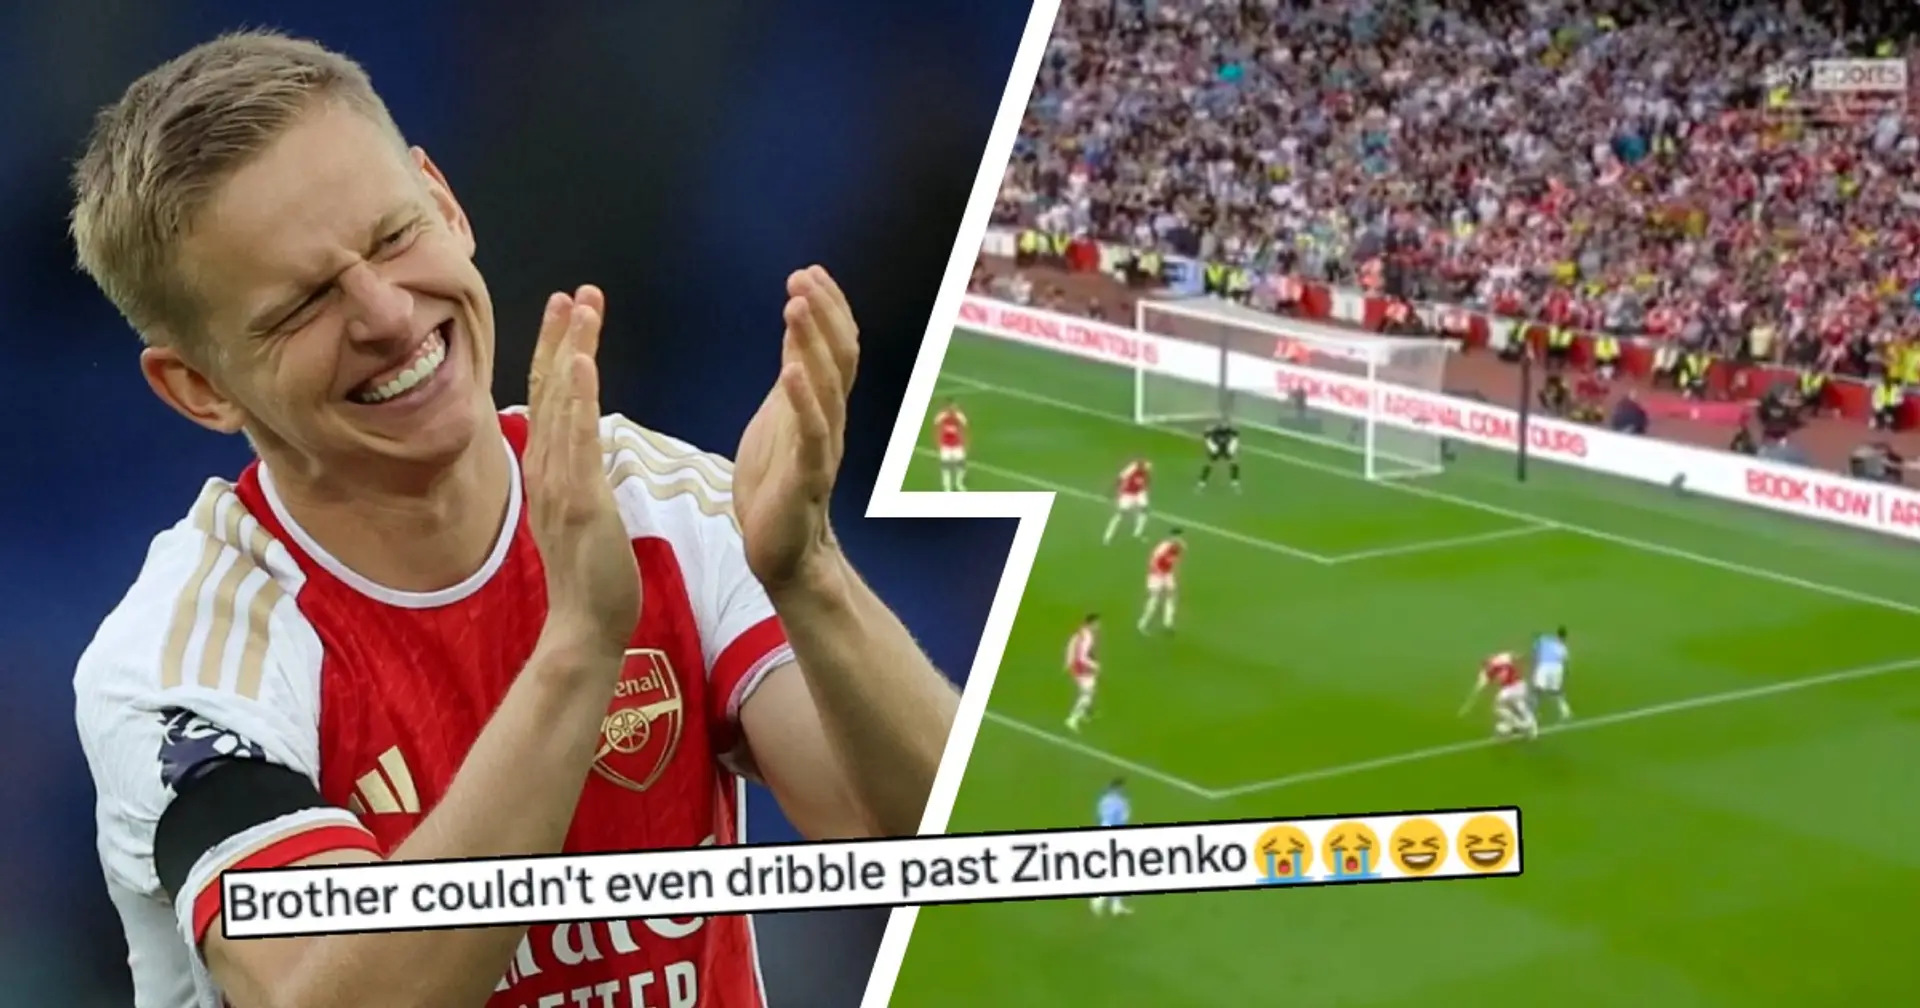 'He doesn't know how to defend': Zinchenko silences critics with perfect tackle on Doku - Fans love it